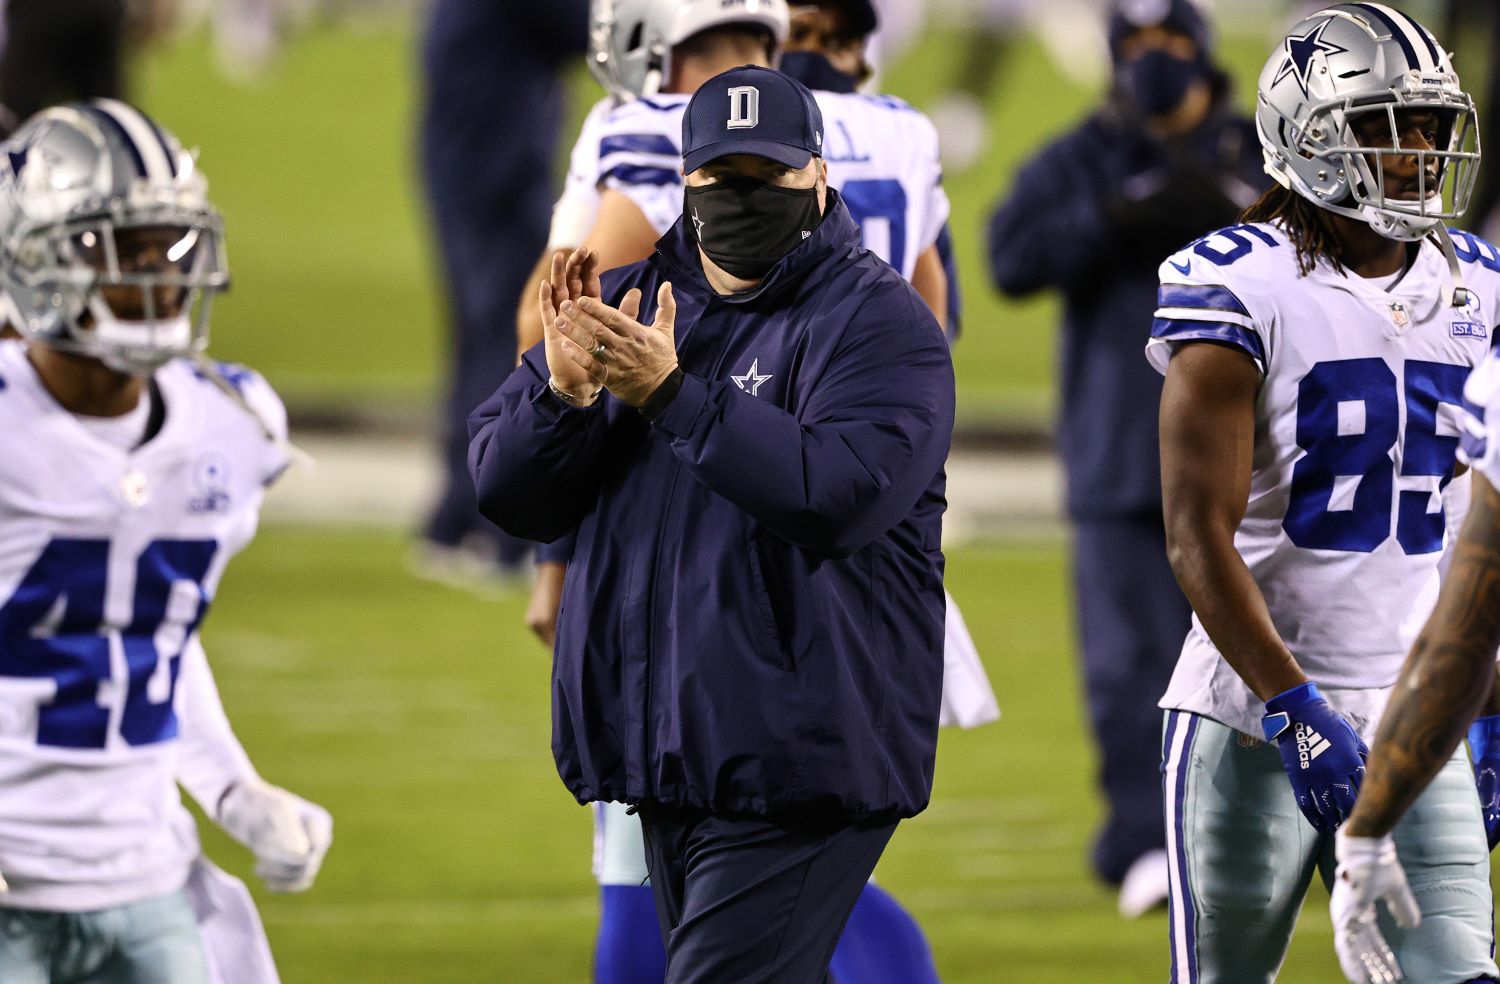 Cowboys head coach Mike McCarthy potentially saved his job by smashing watermelons as part of a team meeting before Sunday's game against the Minnesota Vikings.